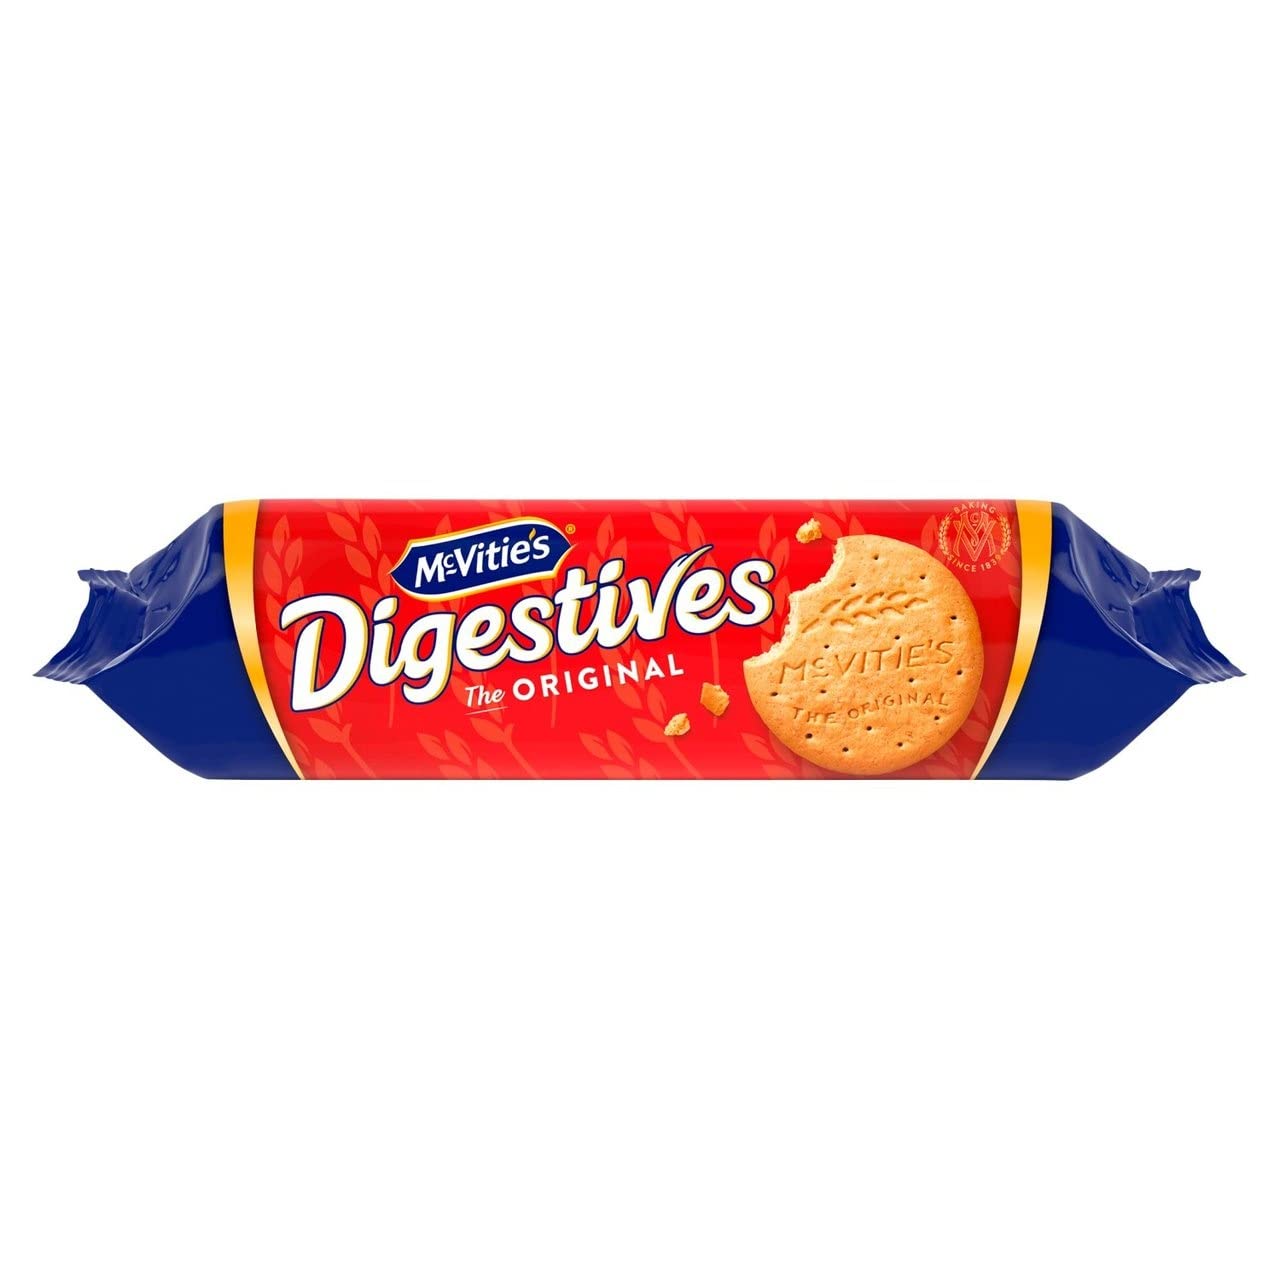 Wholesale sweet biscuit from digestive